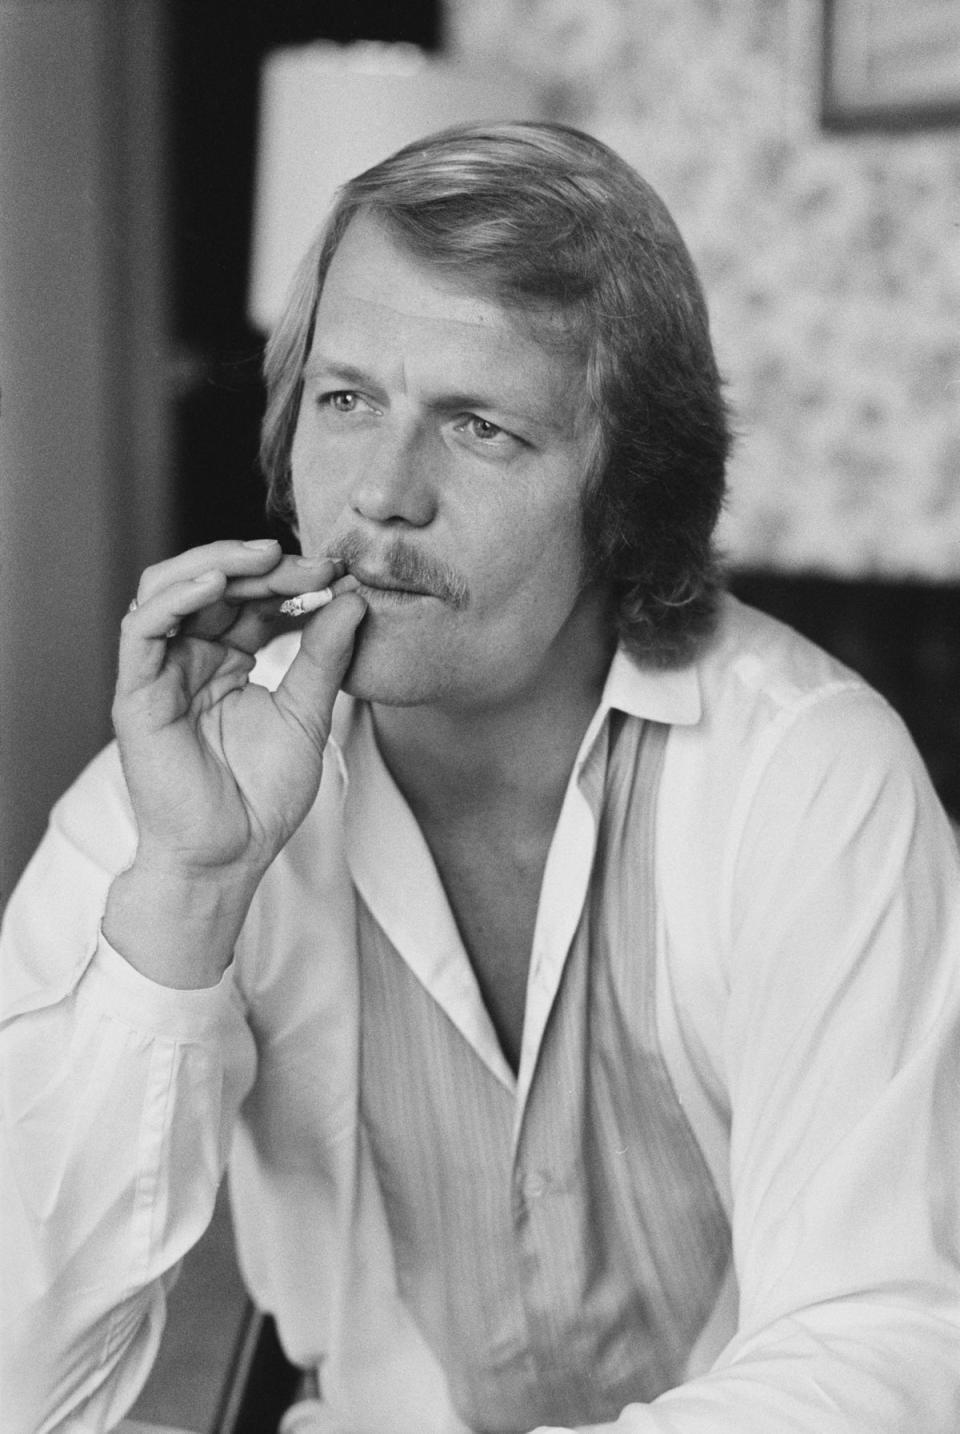 American actor David Soul smoking a cigarette, UK, 18th May 1978. (Getty Images)